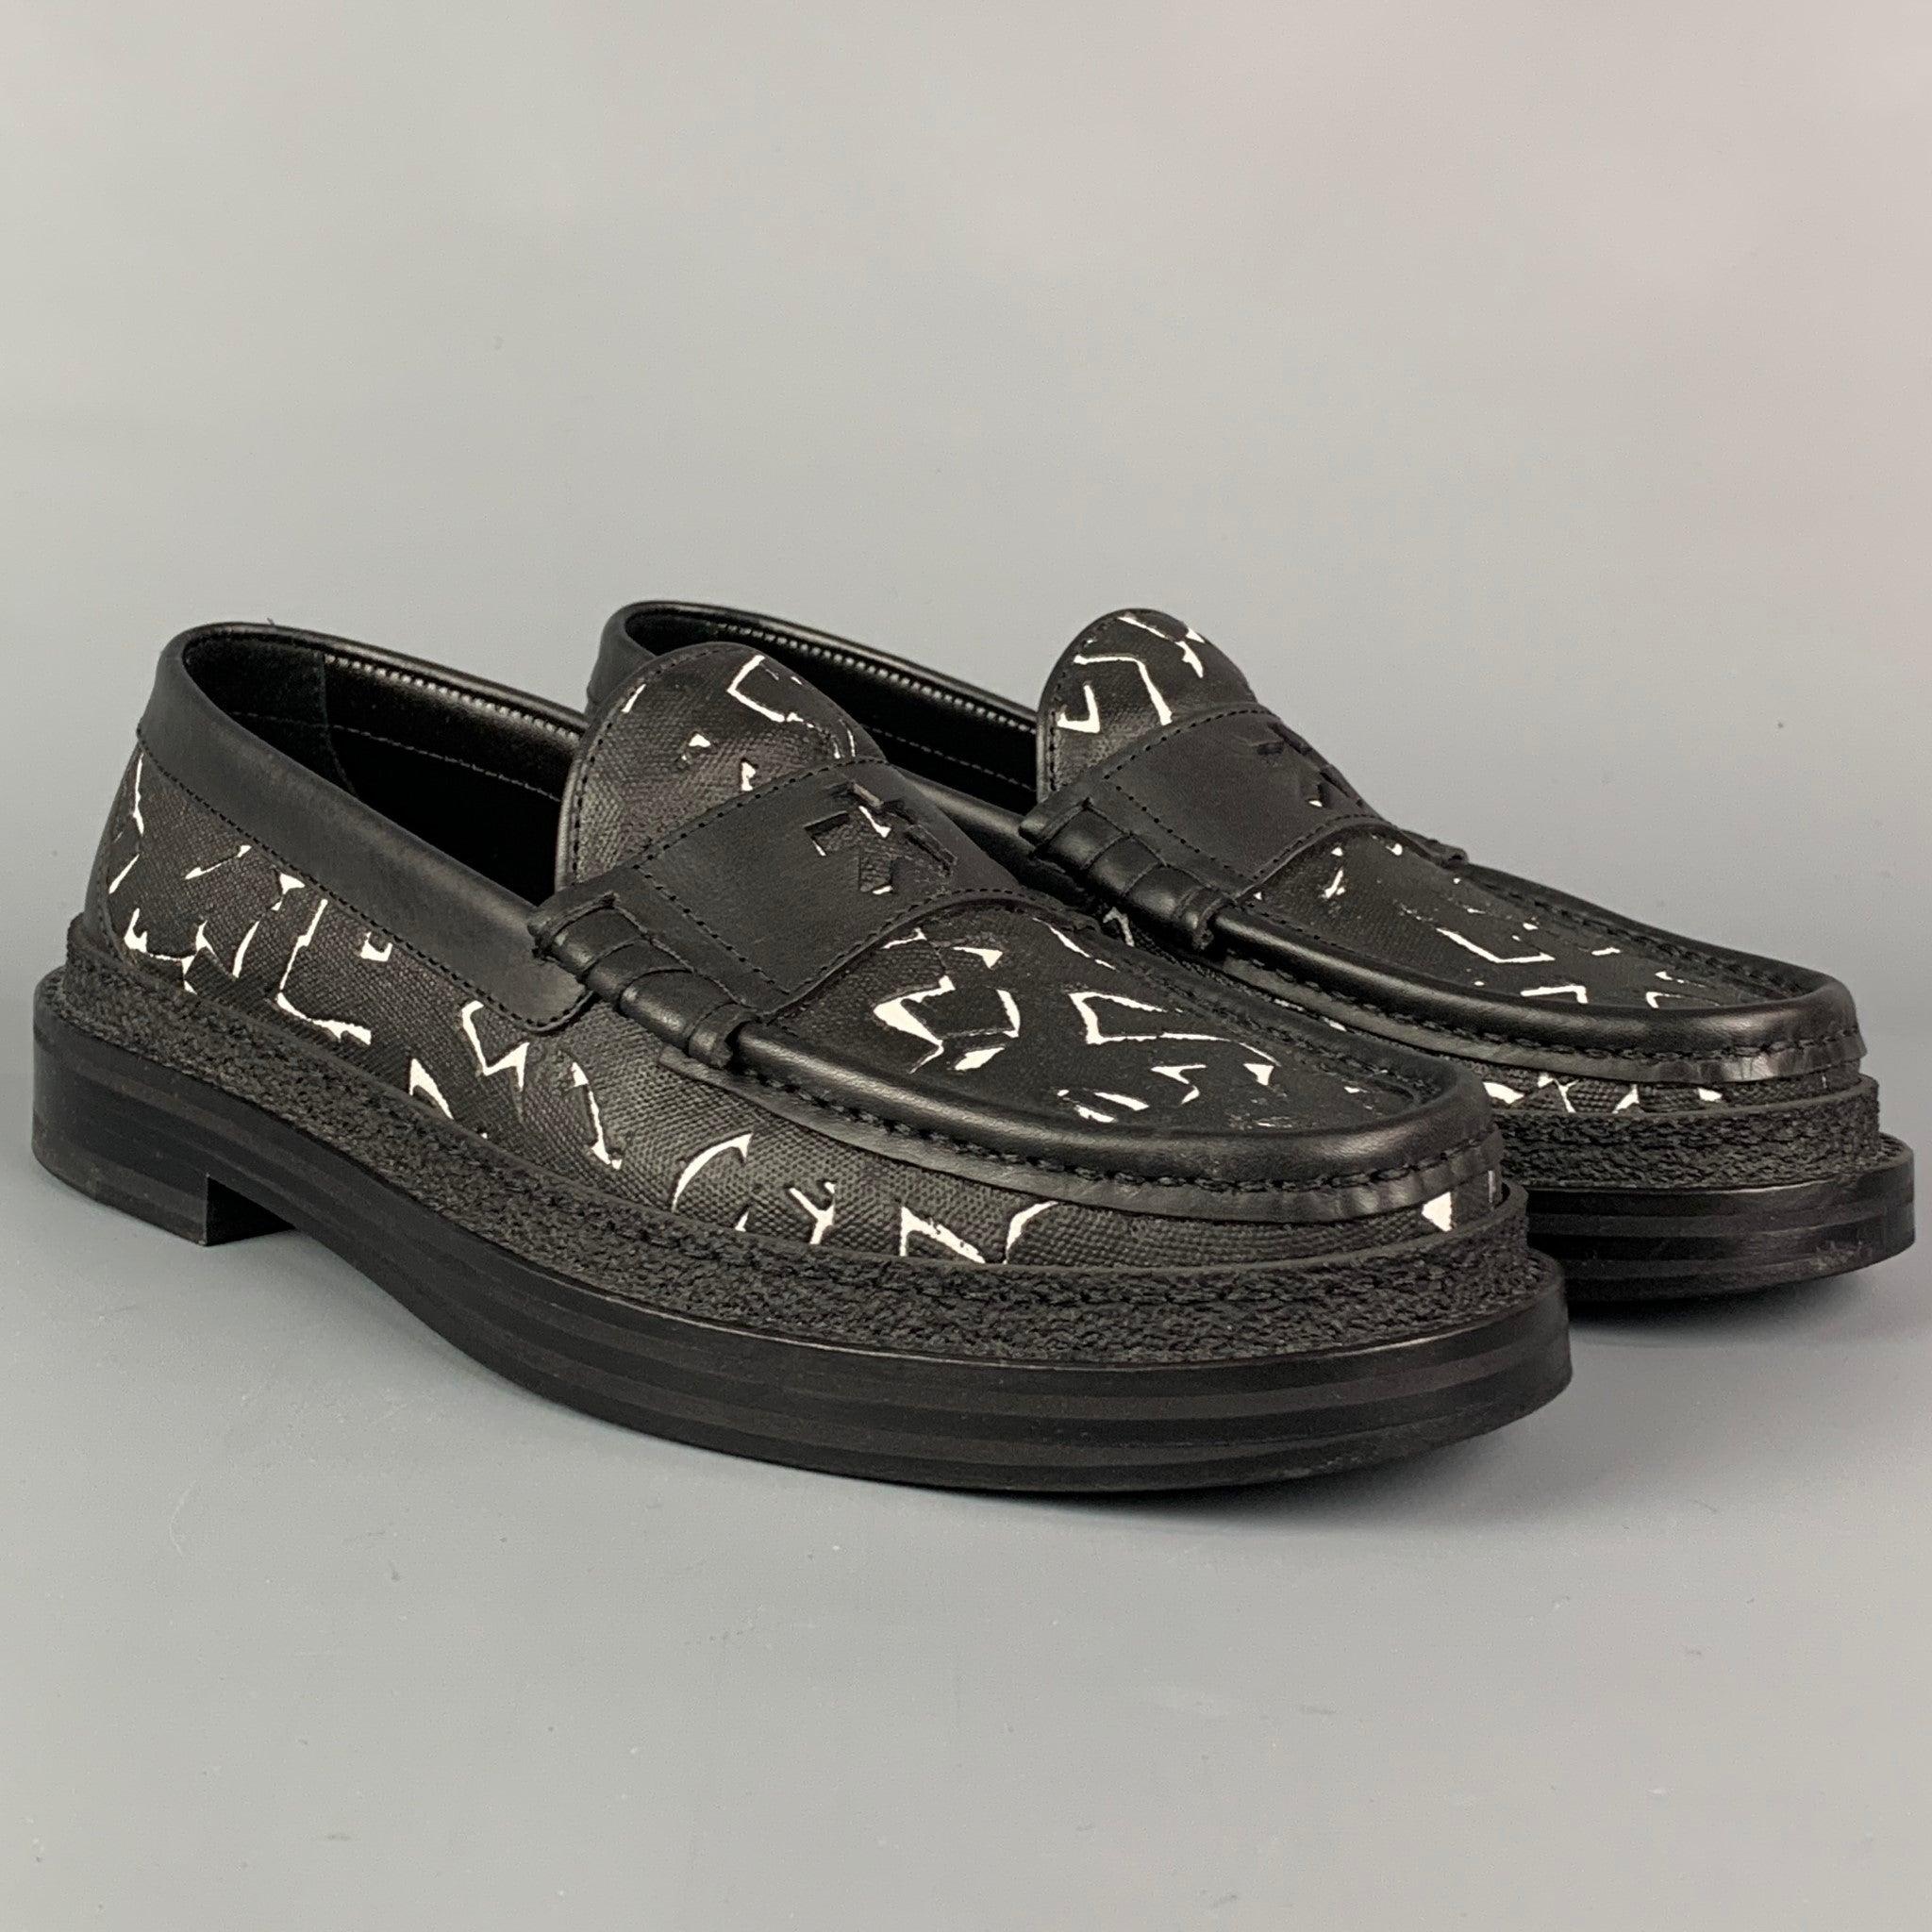 JIMMY CHOO x Eric Haze Collection Curated by Poggy Limited Edition loafers comes in a black & white coated cotton featuring a front strap, slip on, and a leather sole. Made in Italy.
Excellent
Pre-Owned Condition. 

Marked:   37.5Outsole: 10.75